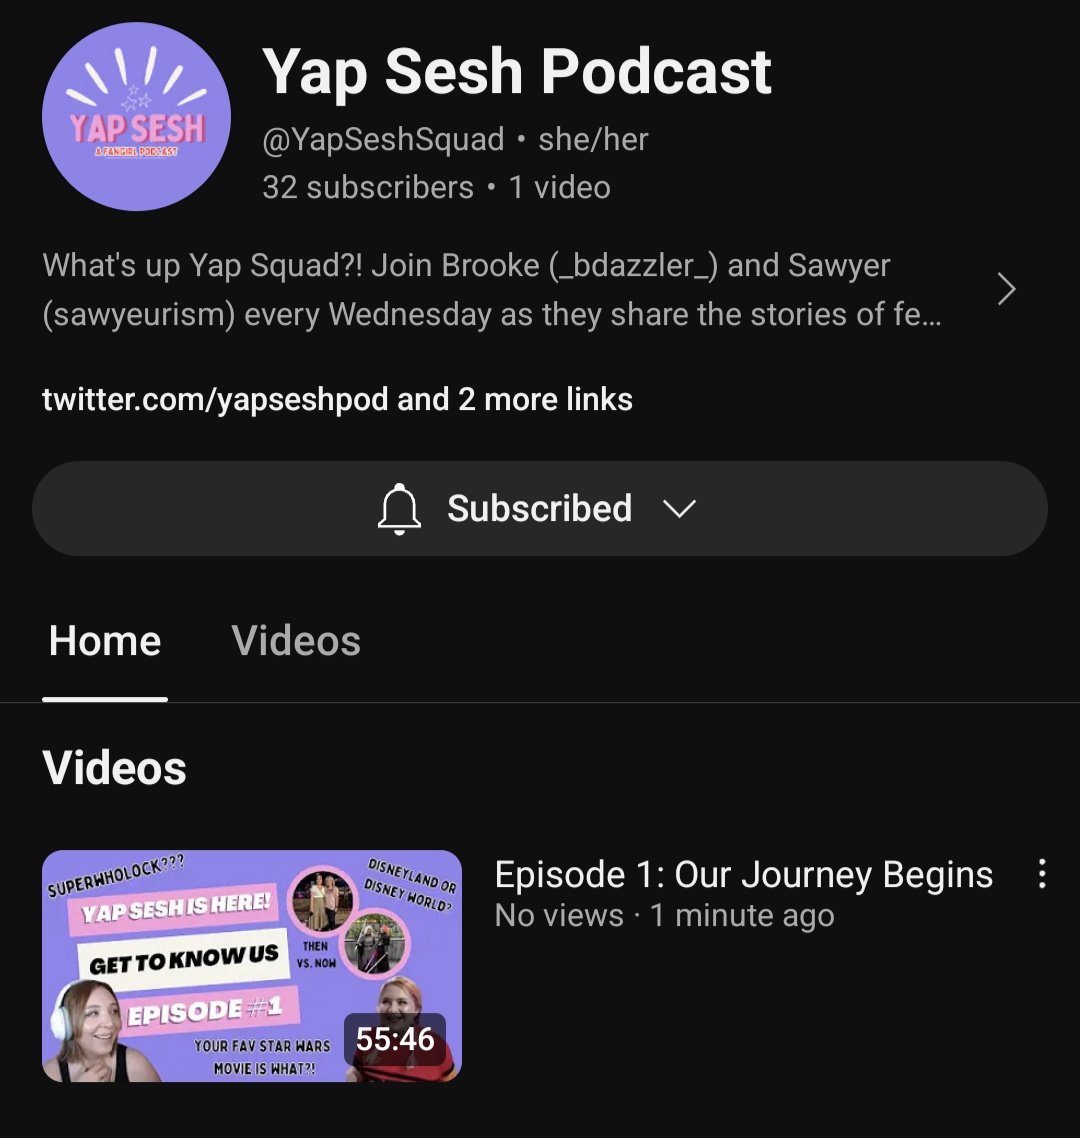 Today's the day!!! The sun is shining, the tank is clean...YAP SESH EPISODE 1 is now streaming on YouTube!!!! 💜🩷❤️🤍